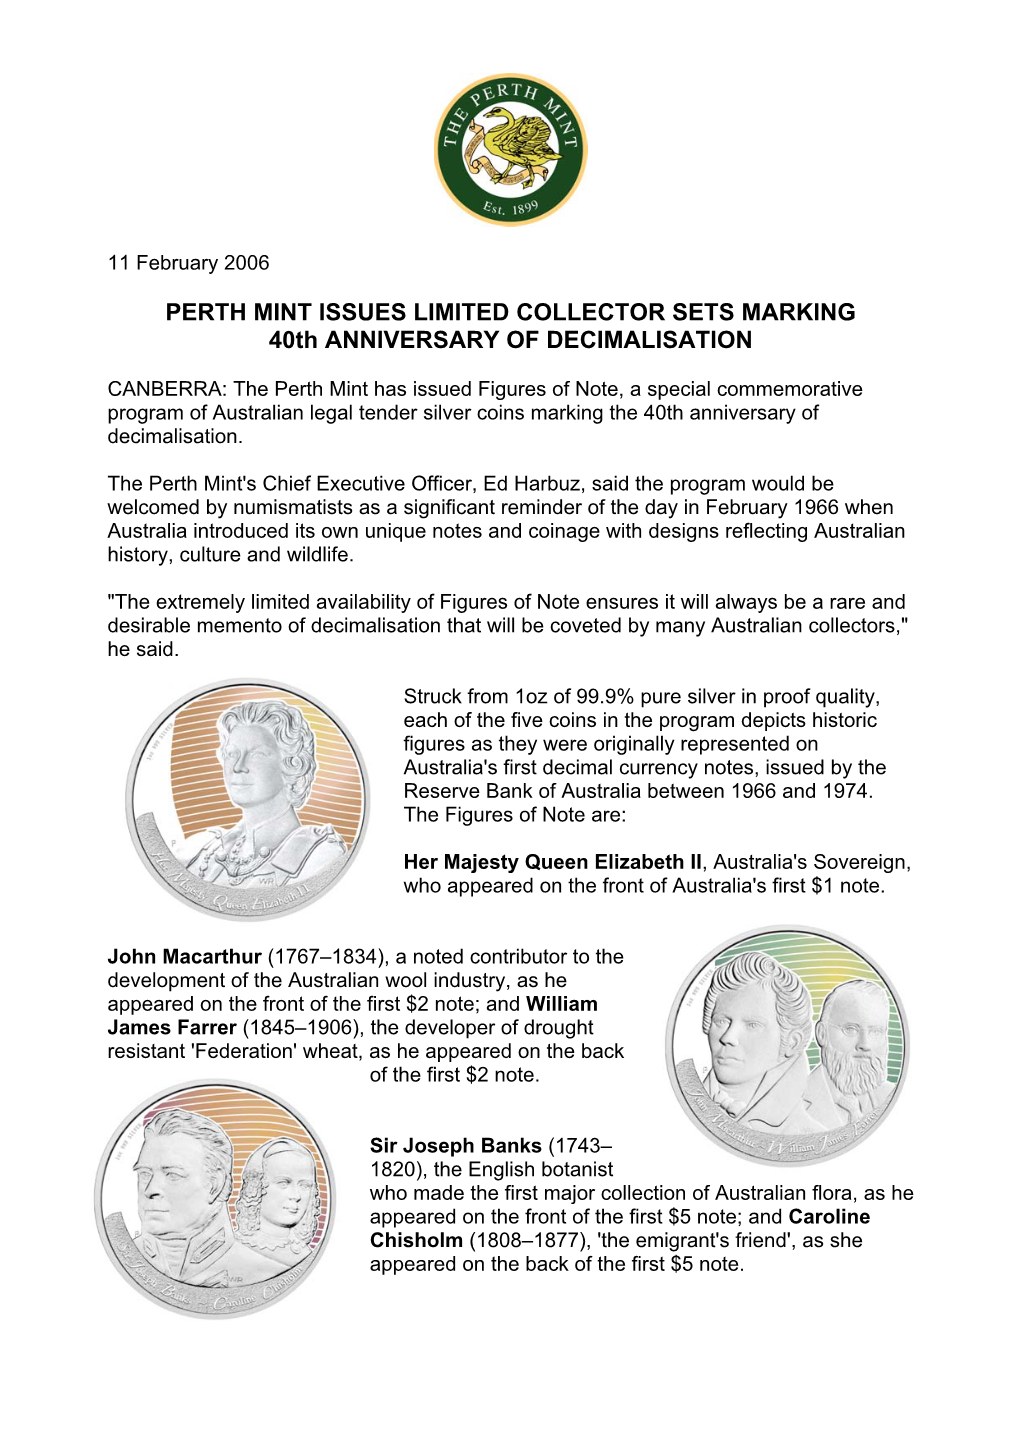 PERTH MINT ISSUES LIMITED COLLECTOR SETS MARKING 40Th ANNIVERSARY of DECIMALISATION